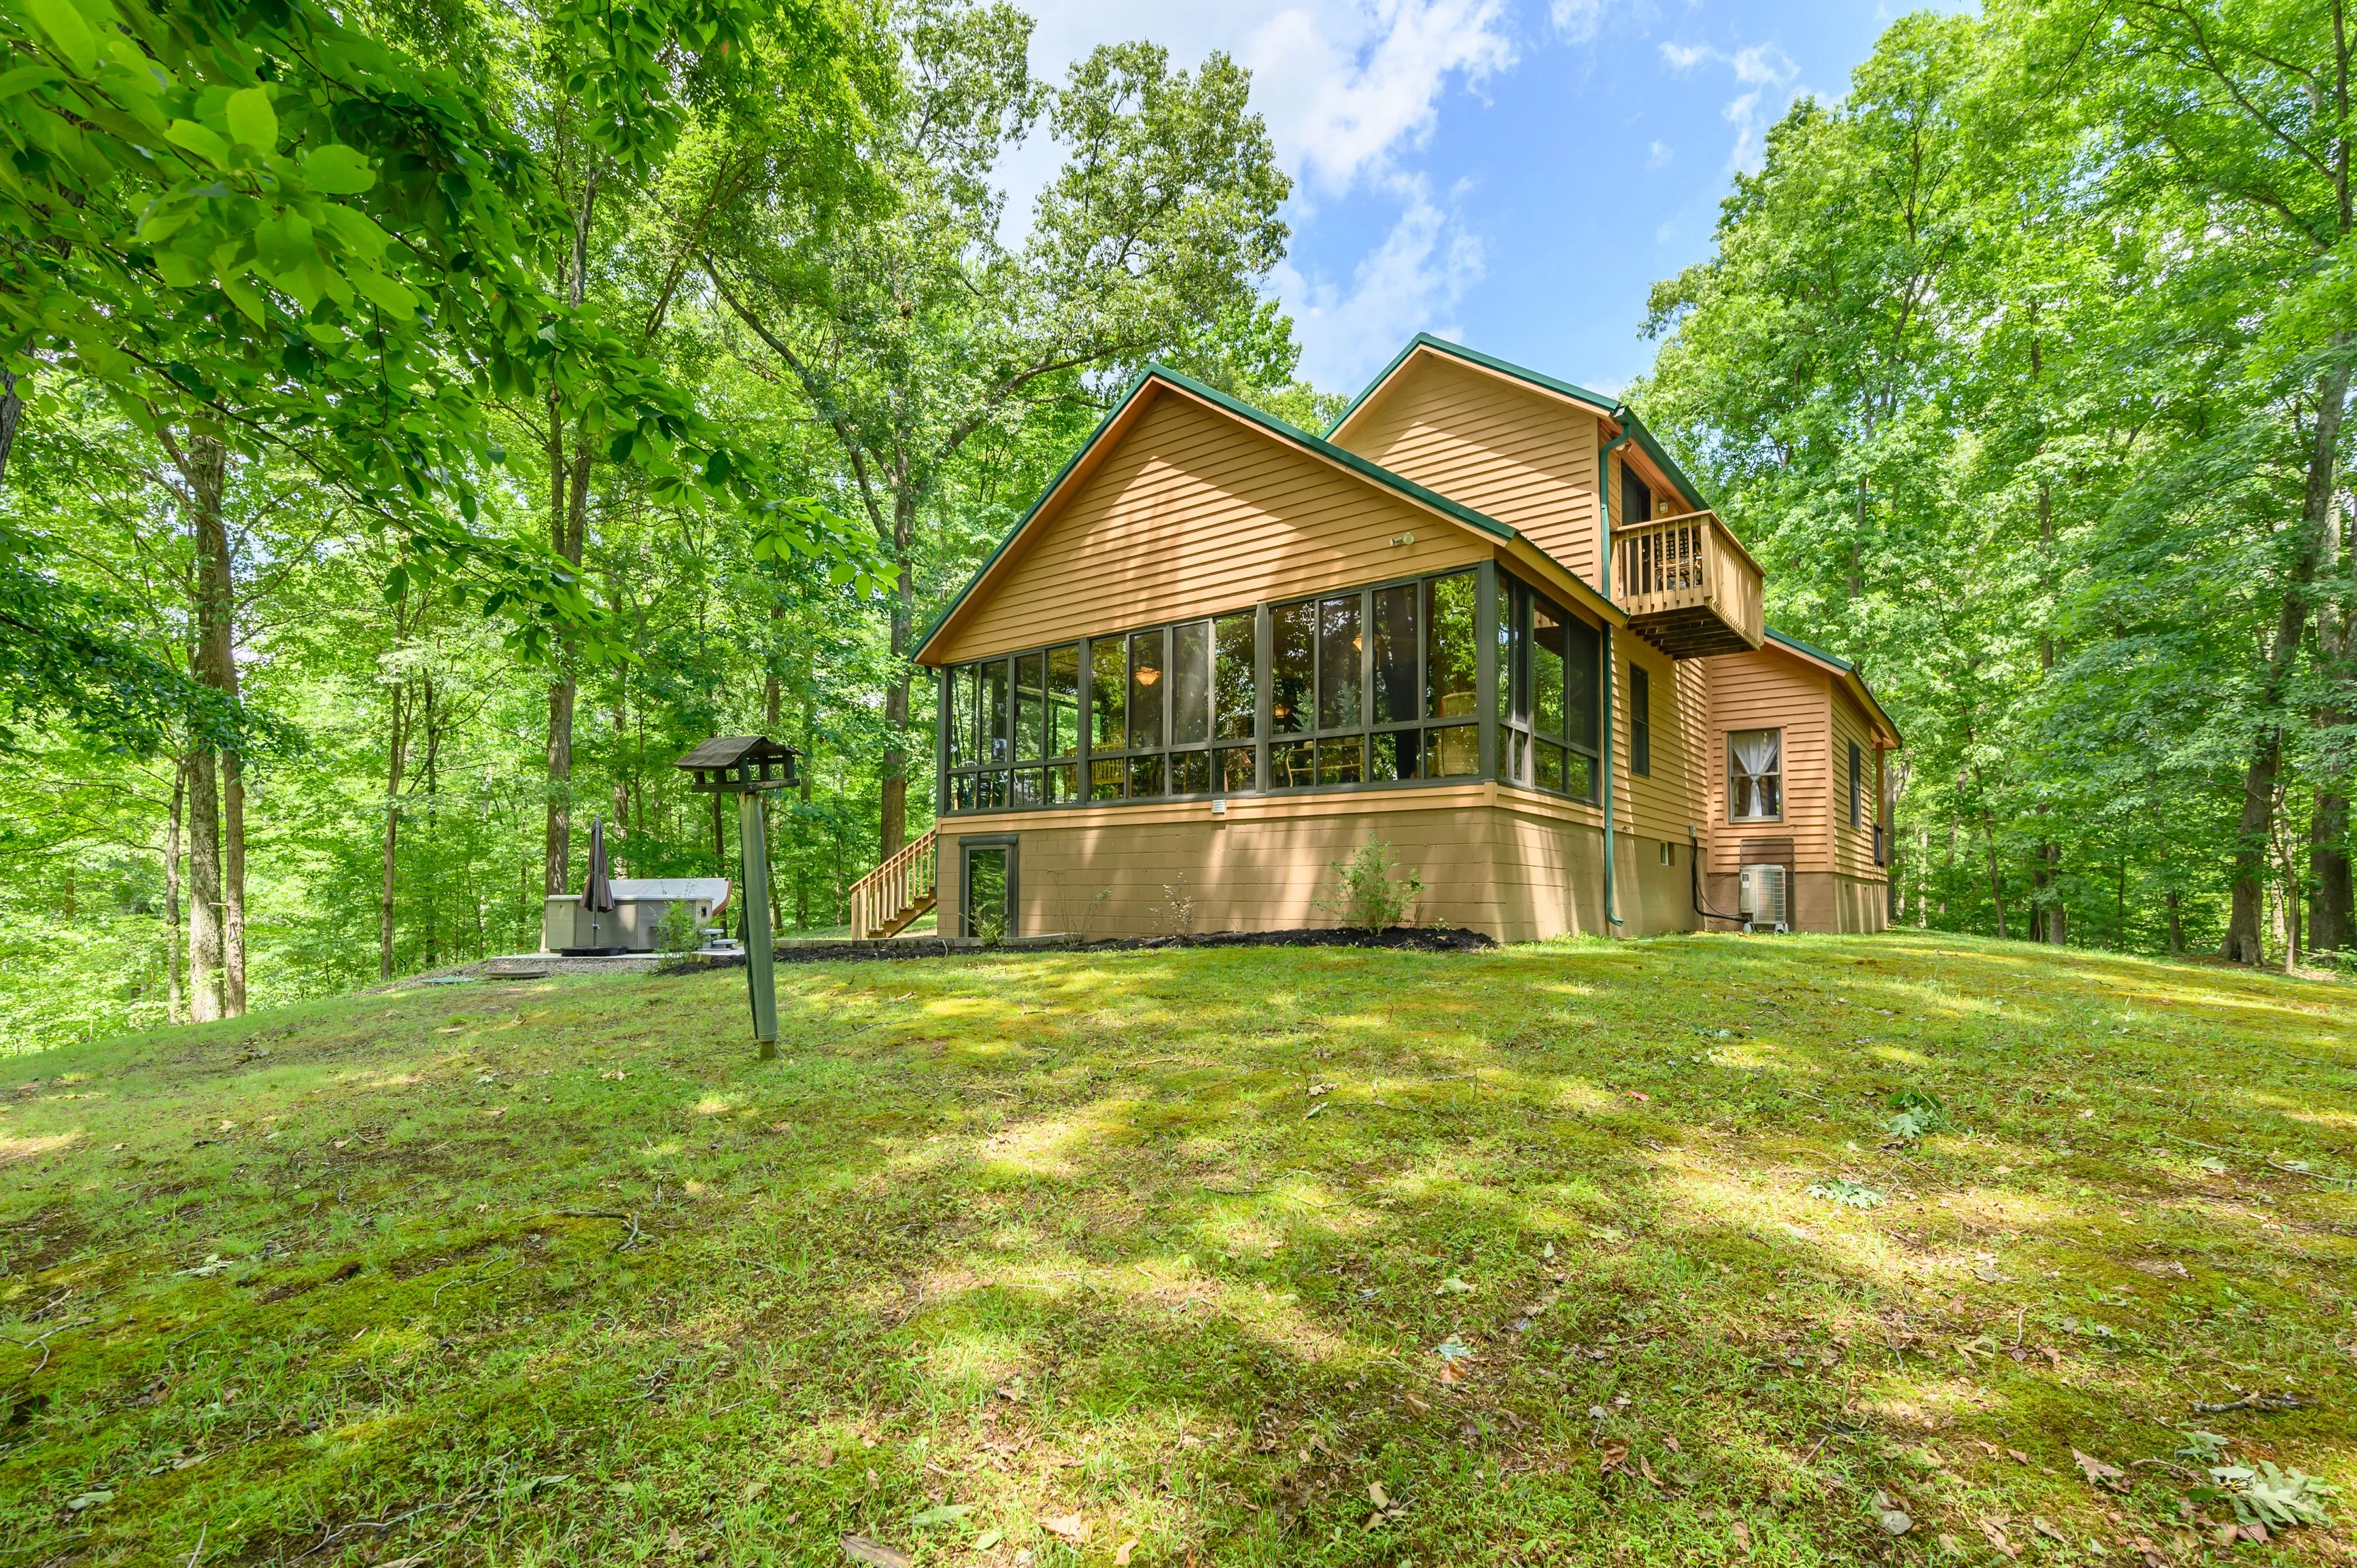 Wooden house with a screened-in porch surrounded by trees on a sunny day.